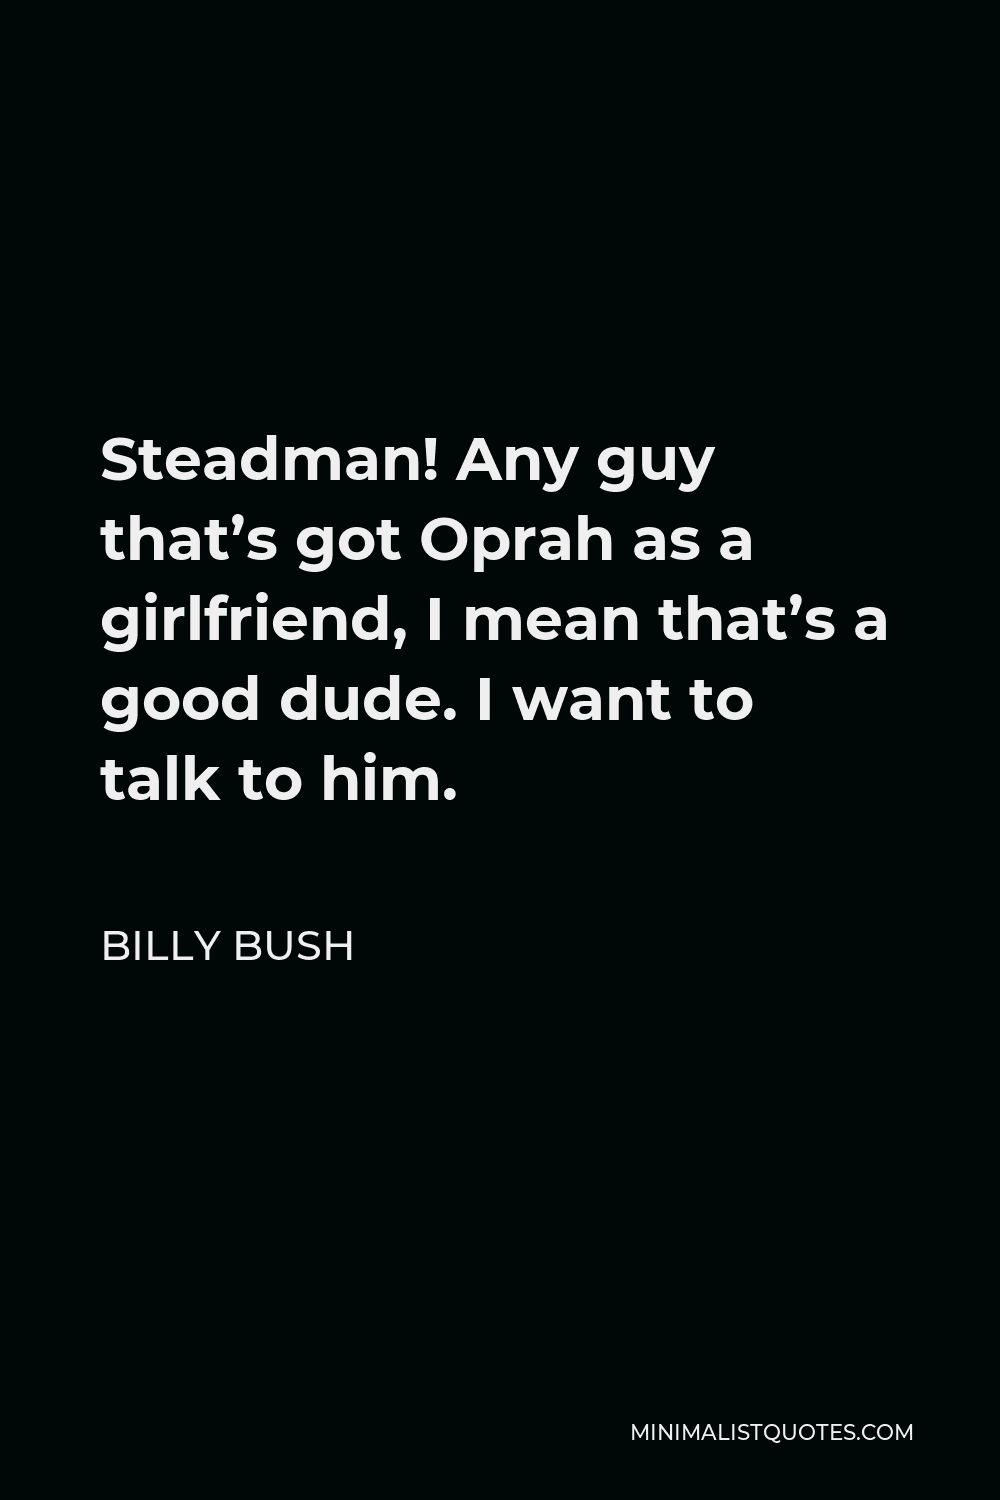 Billy Bush Quote - Steadman! Any guy that’s got Oprah as a girlfriend, I mean that’s a good dude. I want to talk to him.